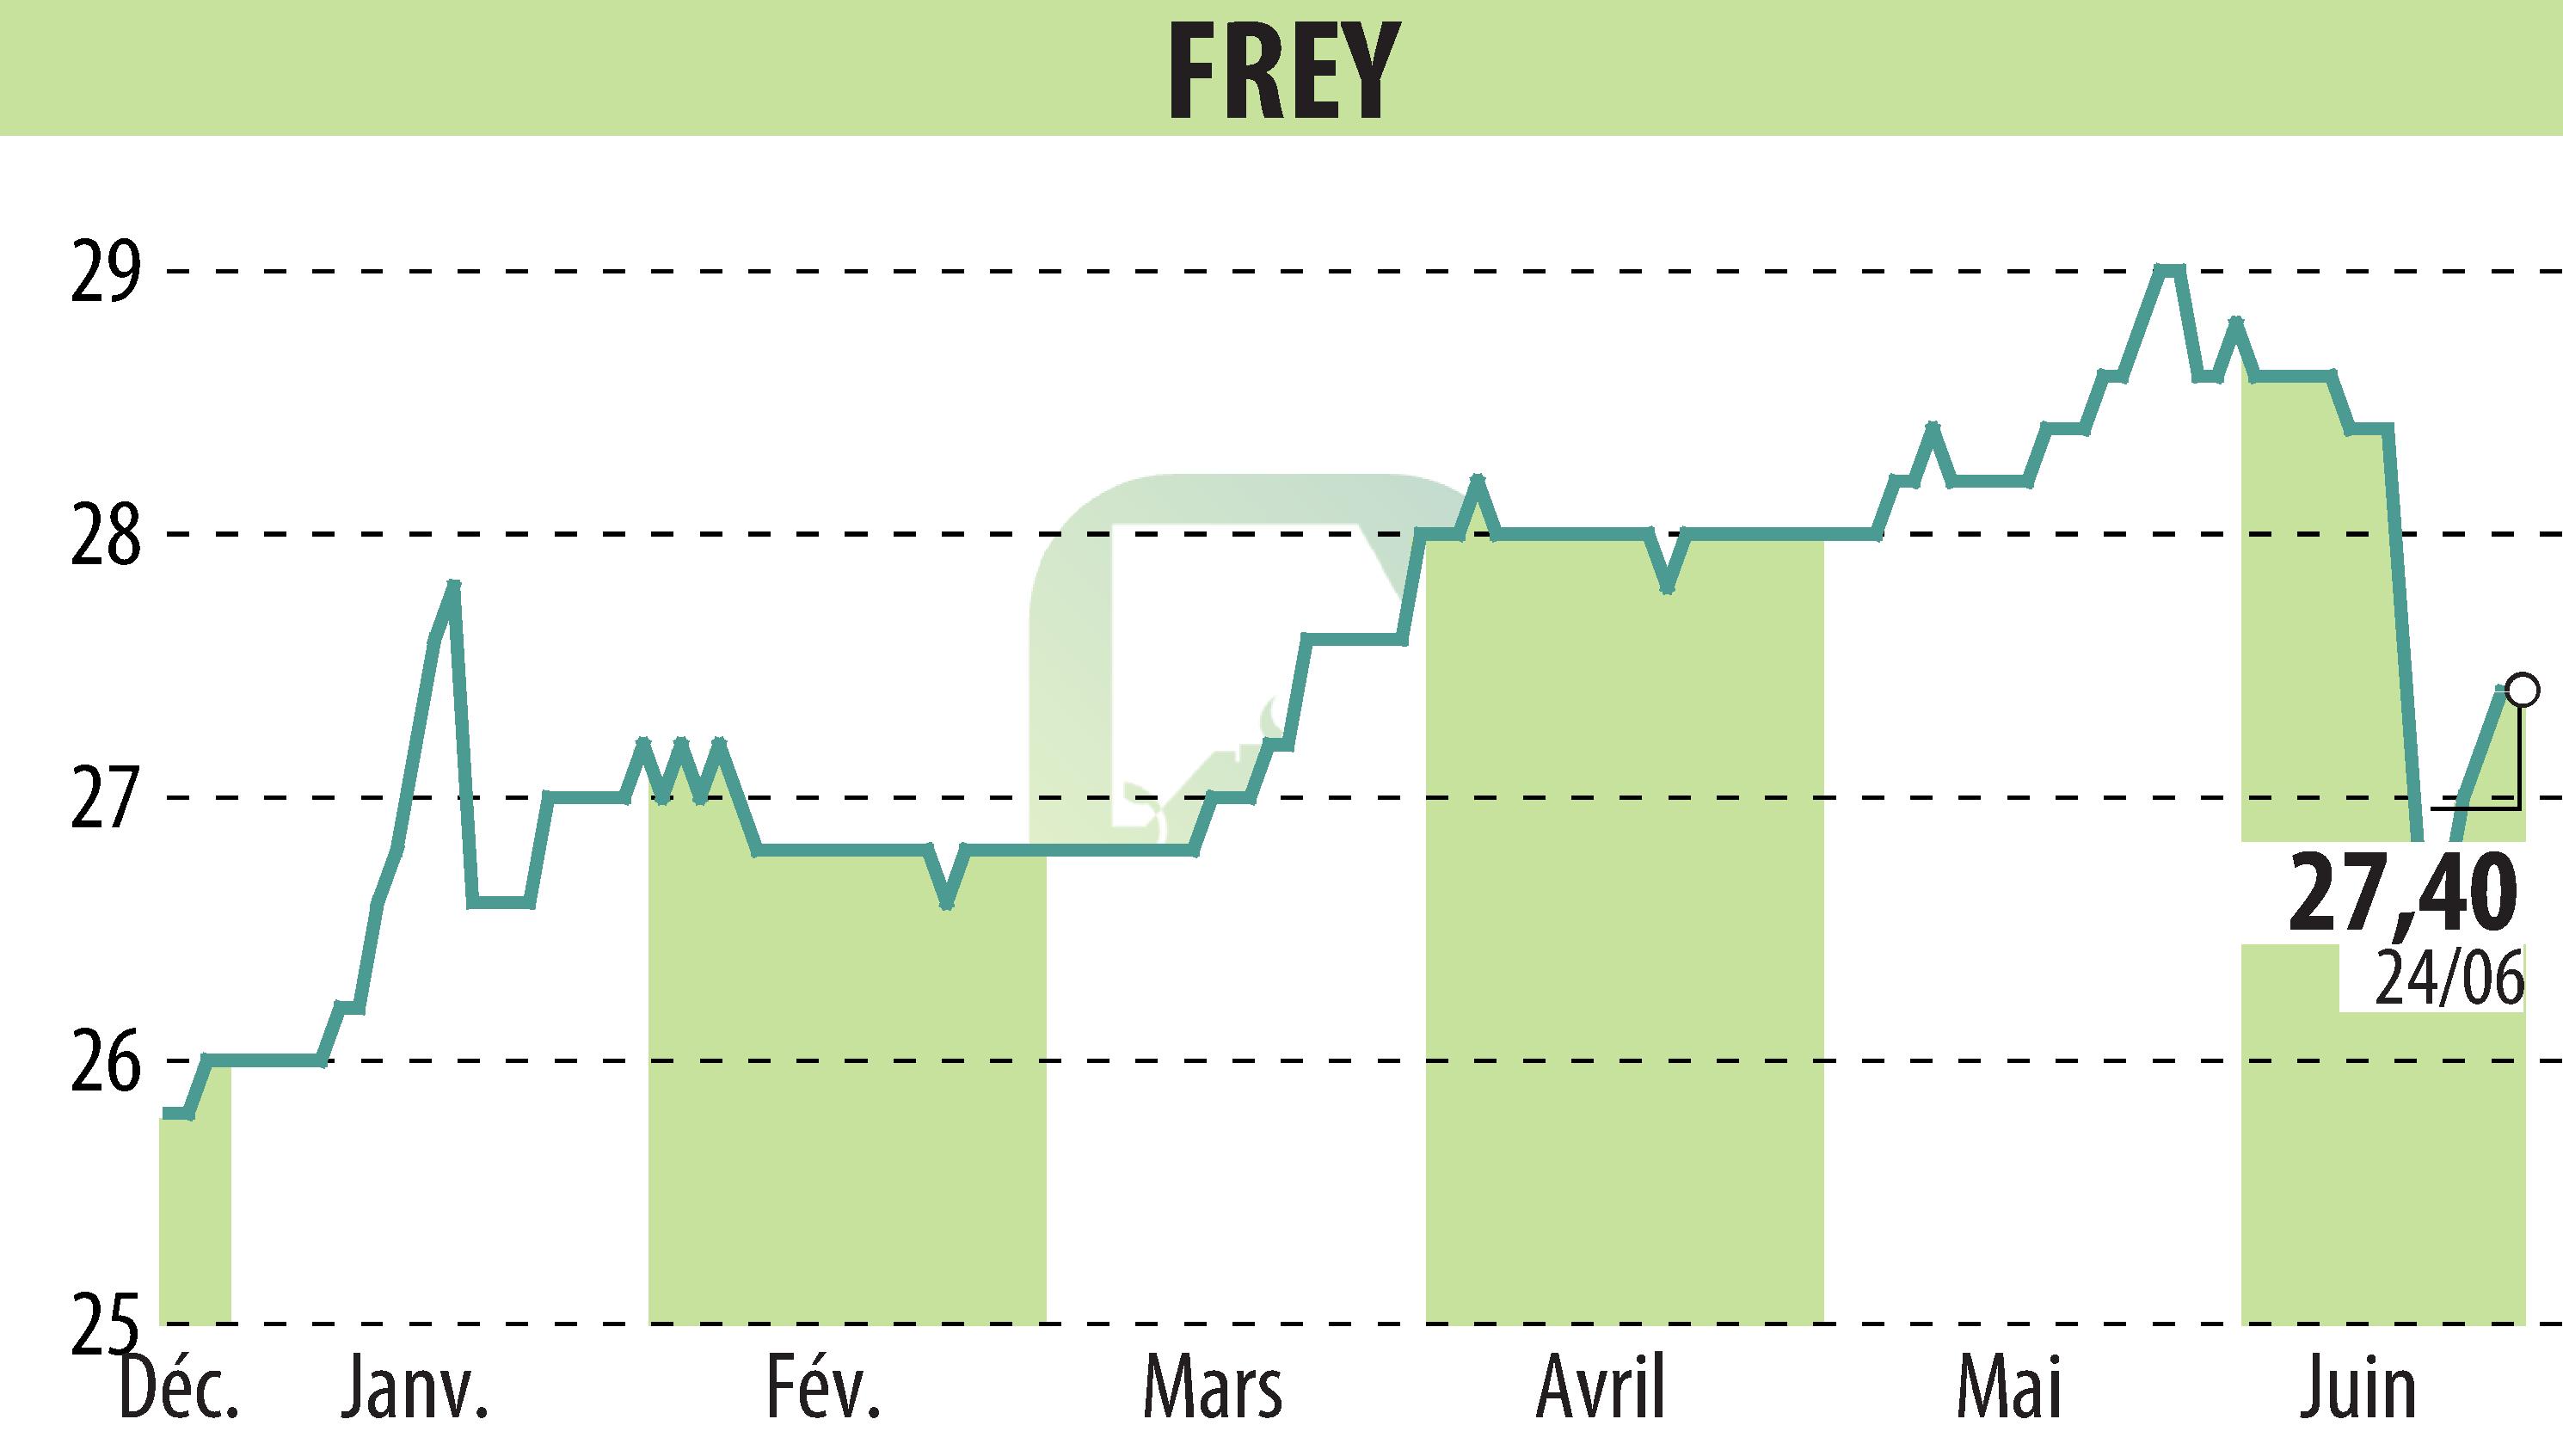 Stock price chart of FREY (EPA:FREY) showing fluctuations.